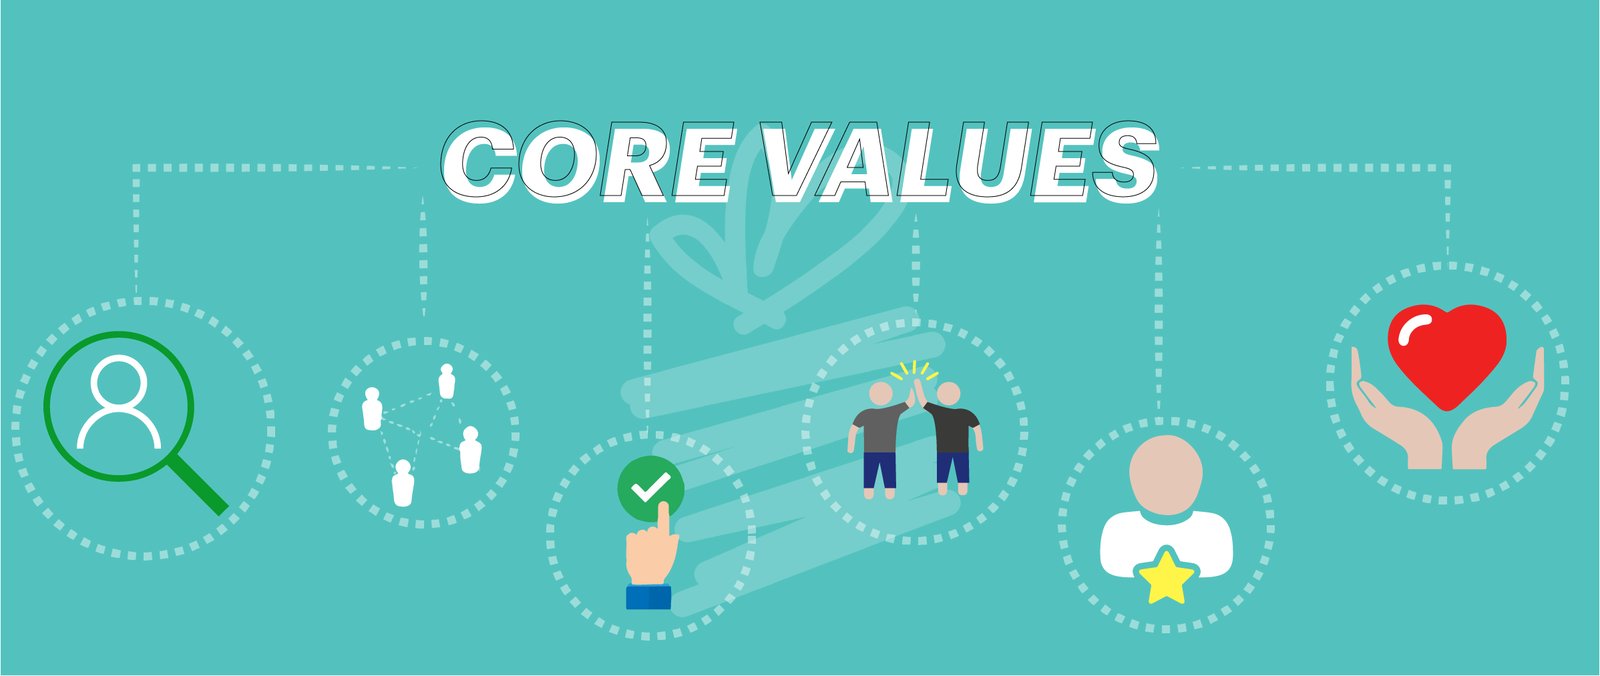 How to Build Core Values that Actually Drive Success